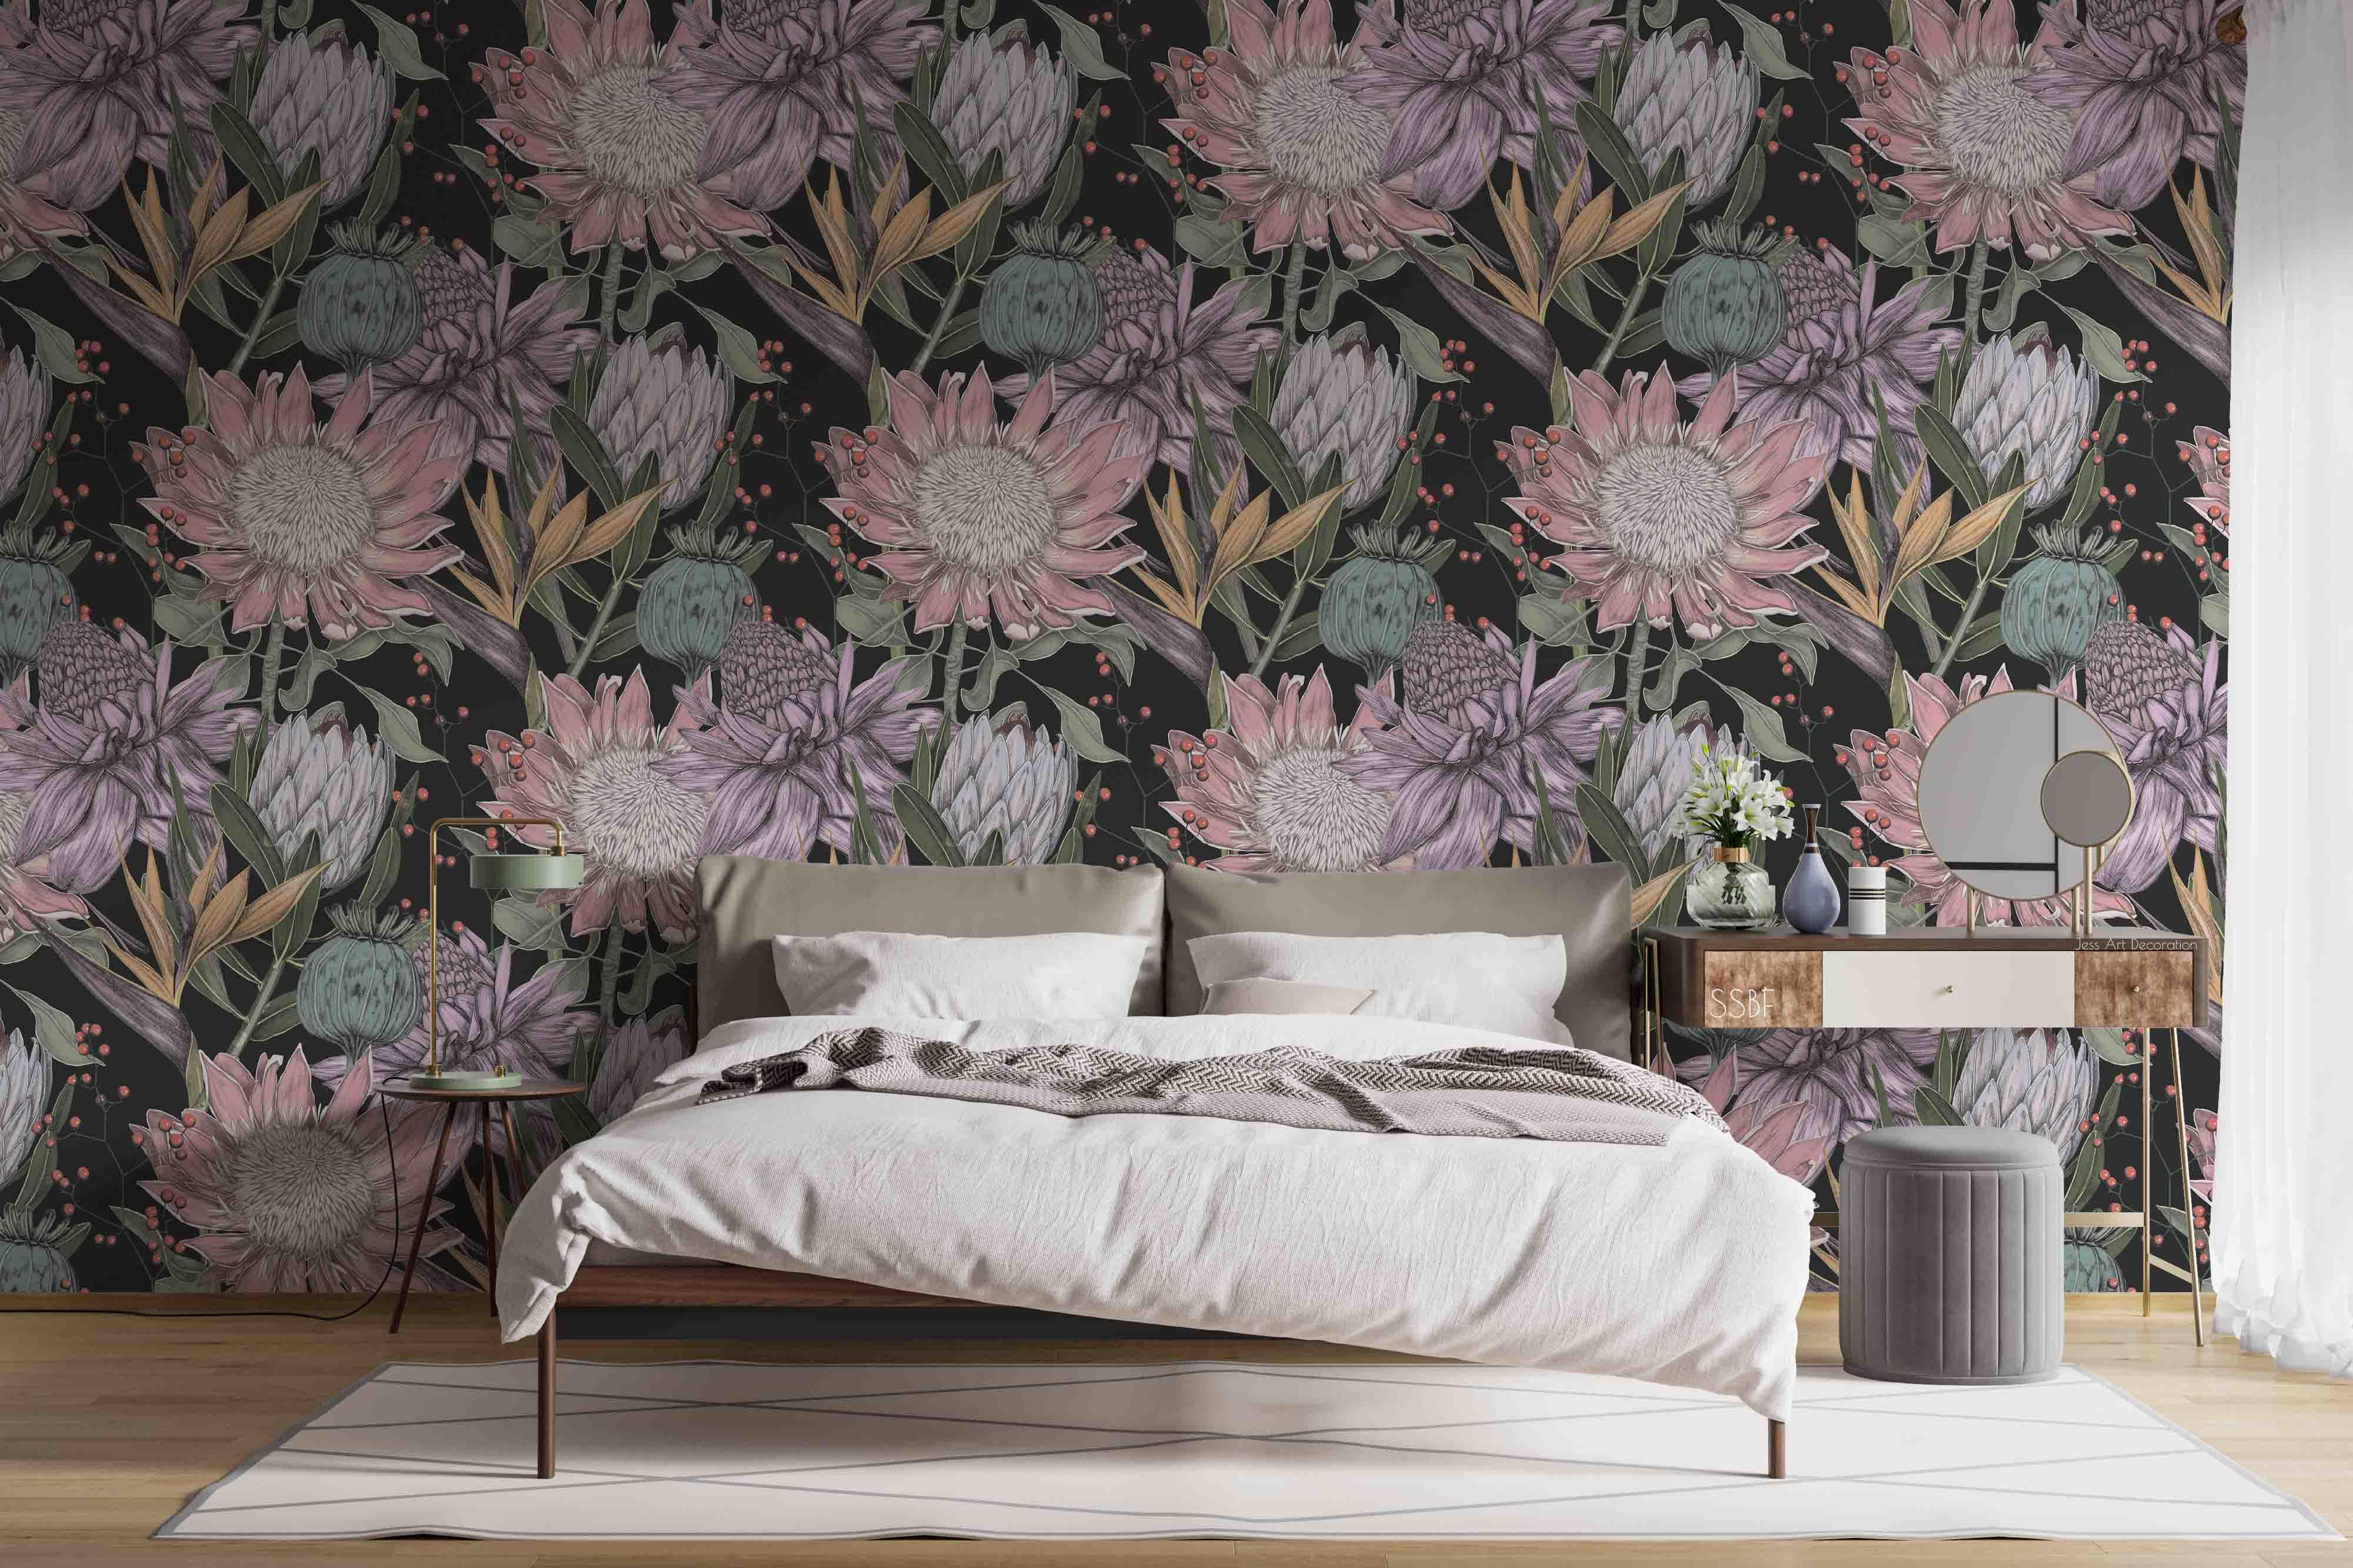 3D Vintage Blooming Flowers Leaves Pattern Wall Mural Wallpaper GD 3524- Jess Art Decoration